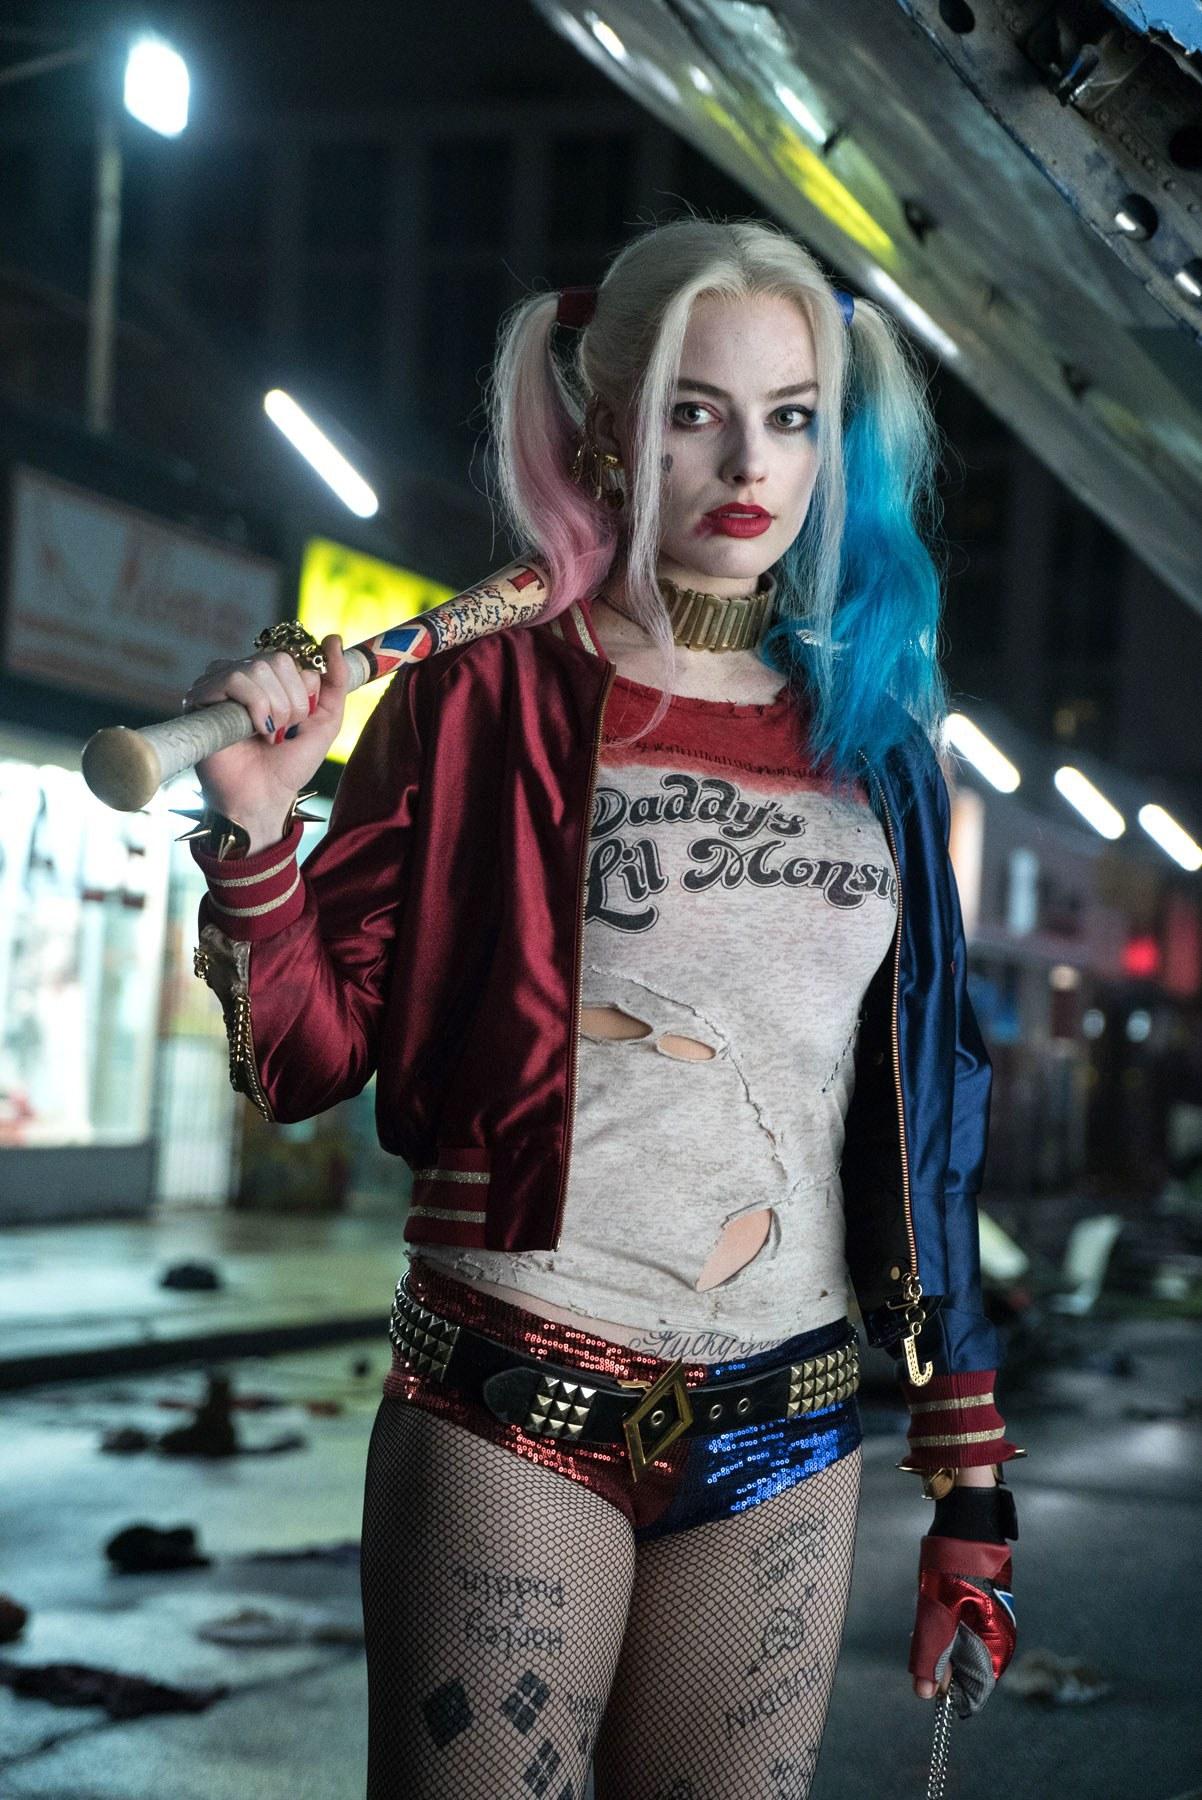 Harley Quinn Mobile Wallpaper, Picture